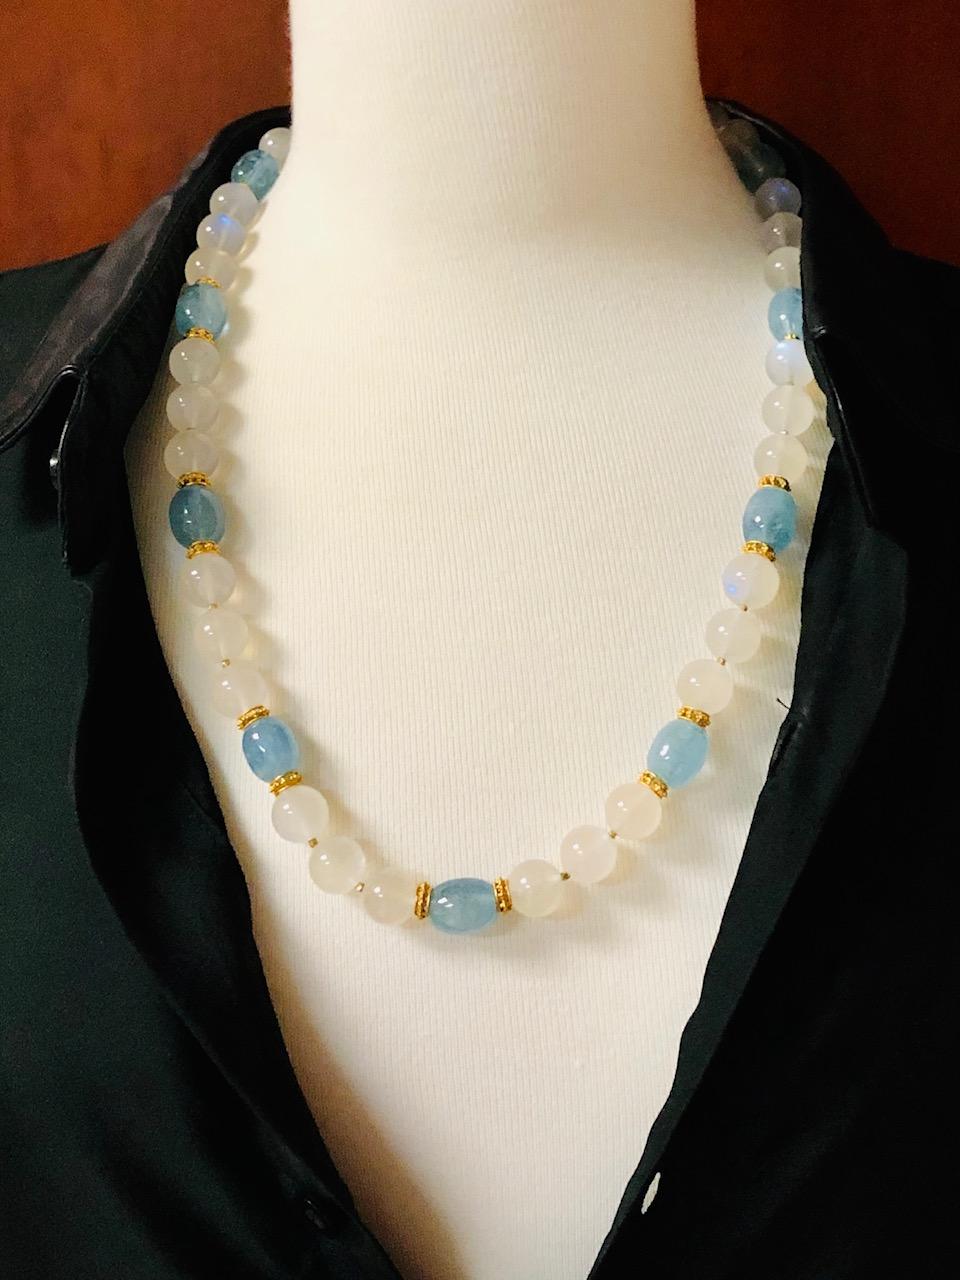 Moonstone Bead and Aquamarine Bead Necklace with Yellow Gold Spacers, 24 Inches 2